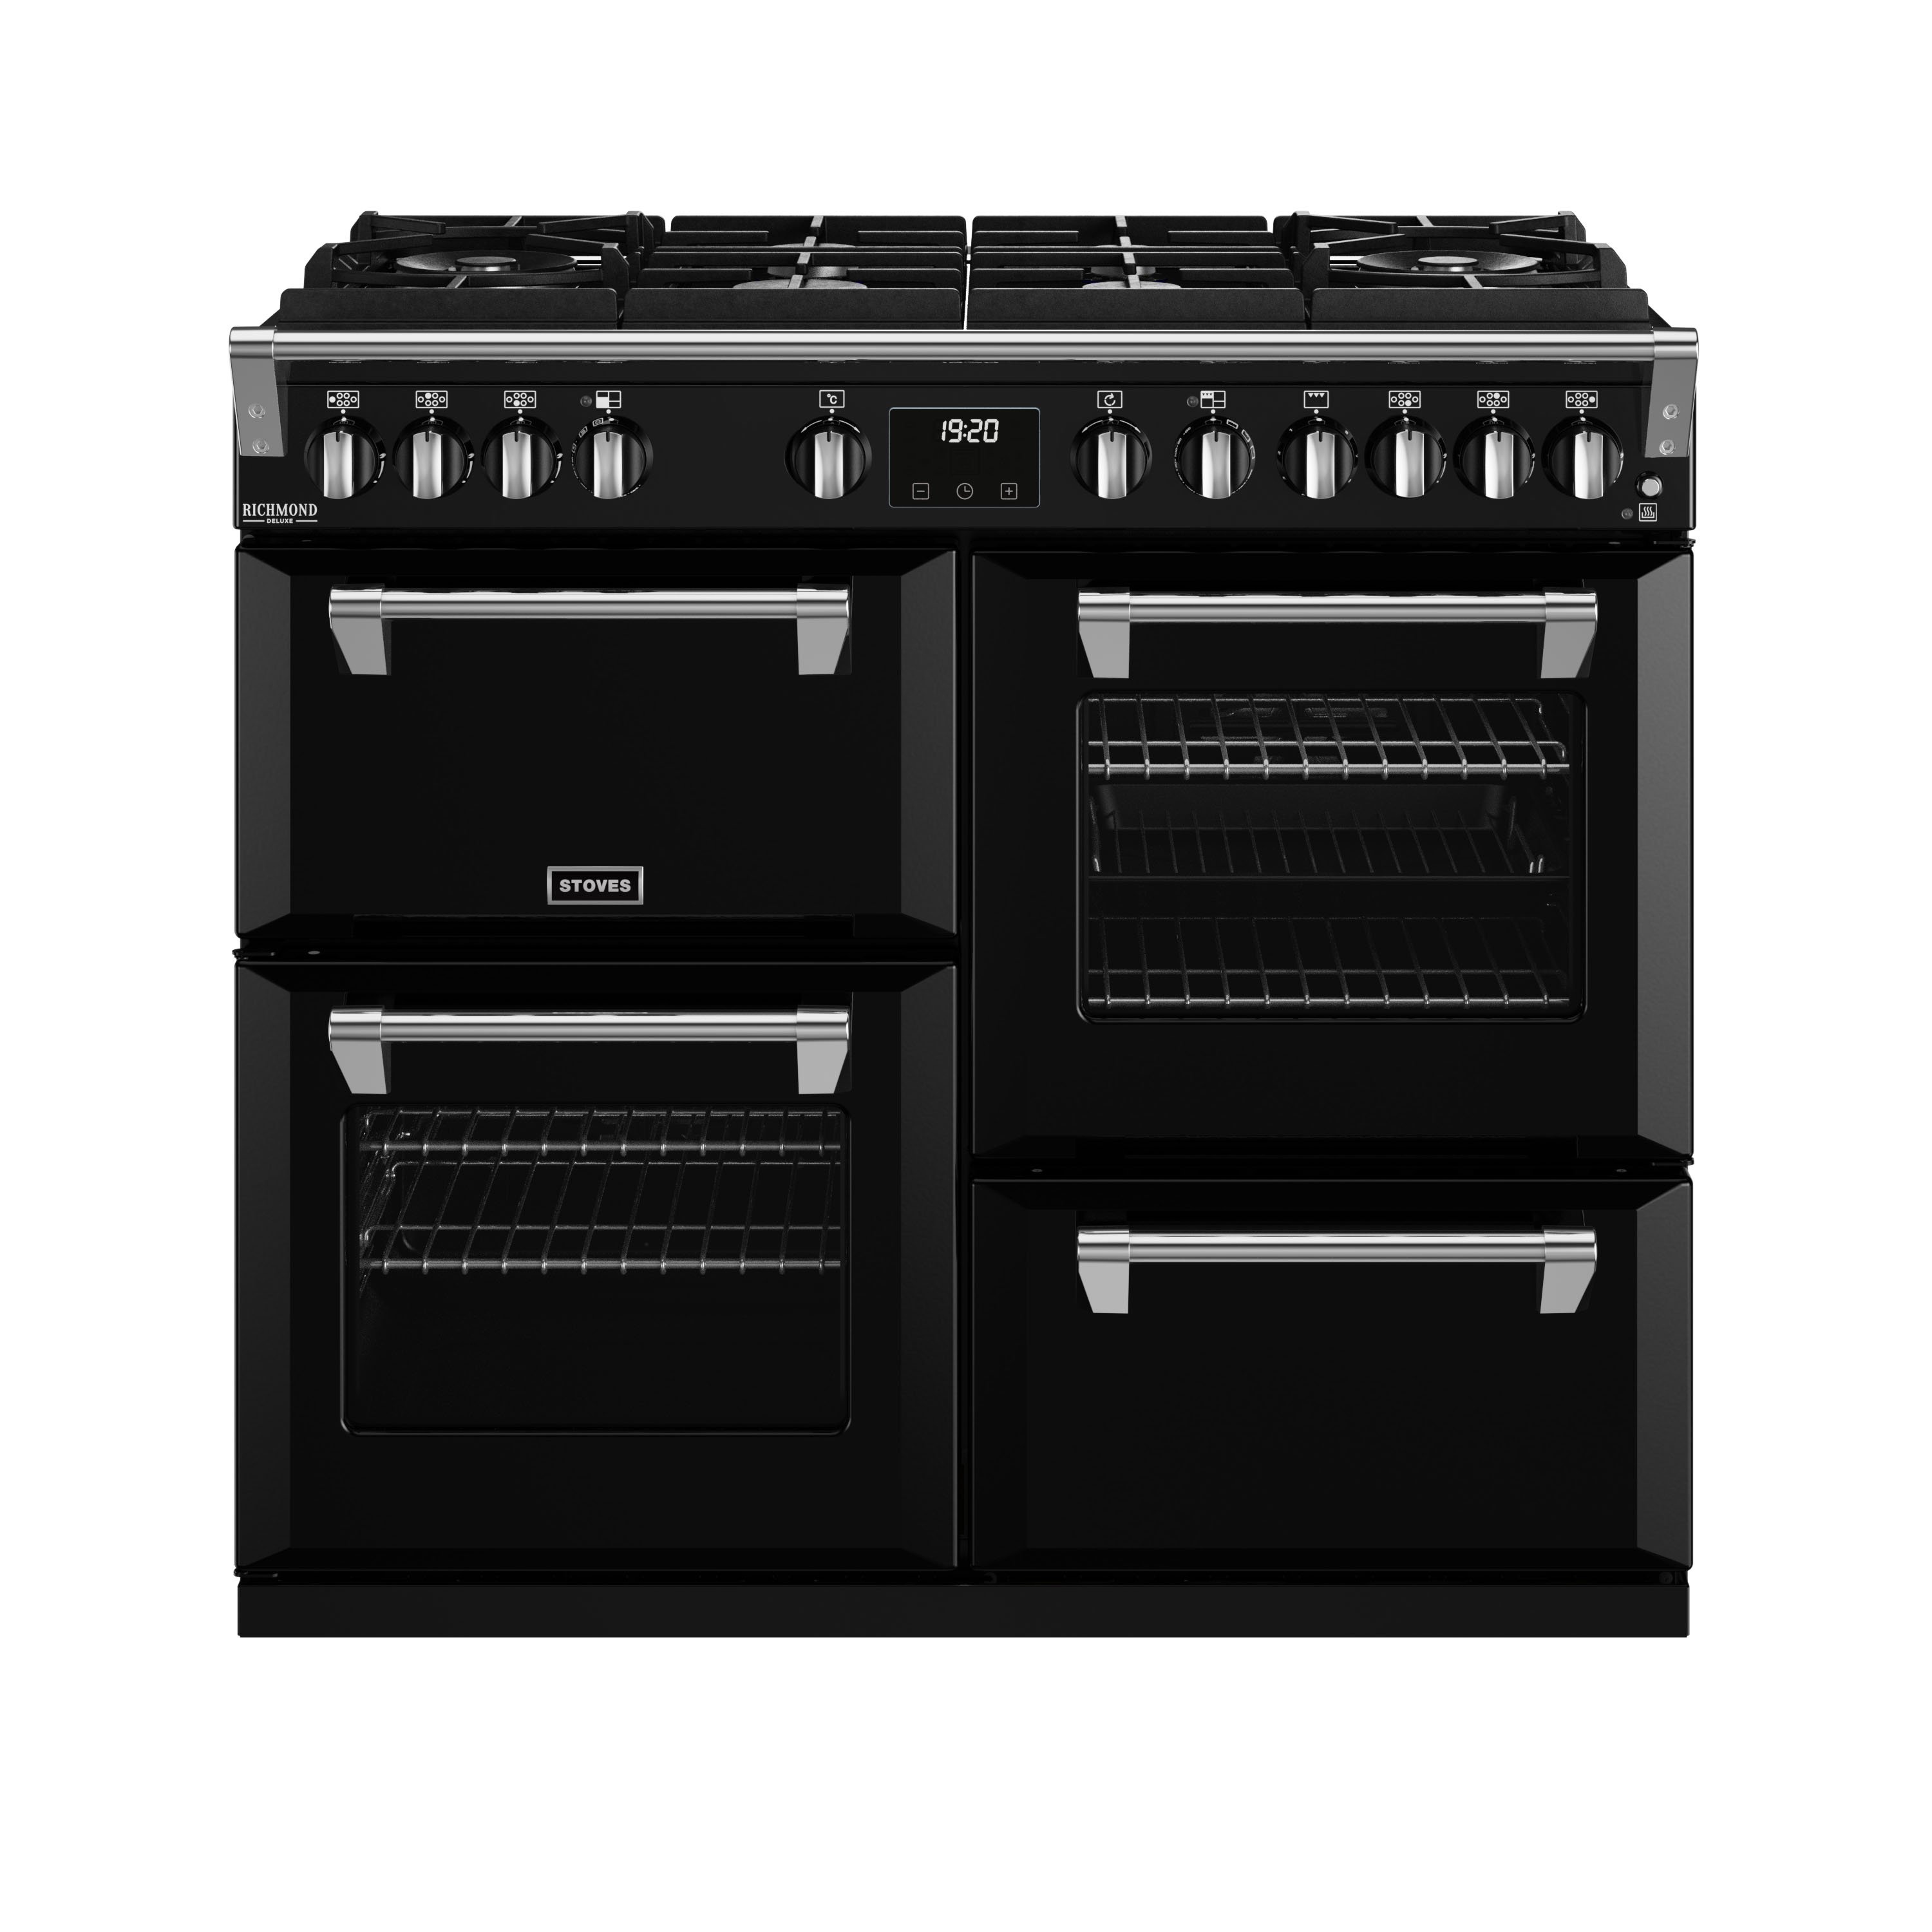 100cm dual fuel range cooker with a 6 burner Gas-Through-Glass hob, conventional oven & grill, multifunction main oven with TrueTemp digital thermostat, fanned second oven and dedicated slow cook oven